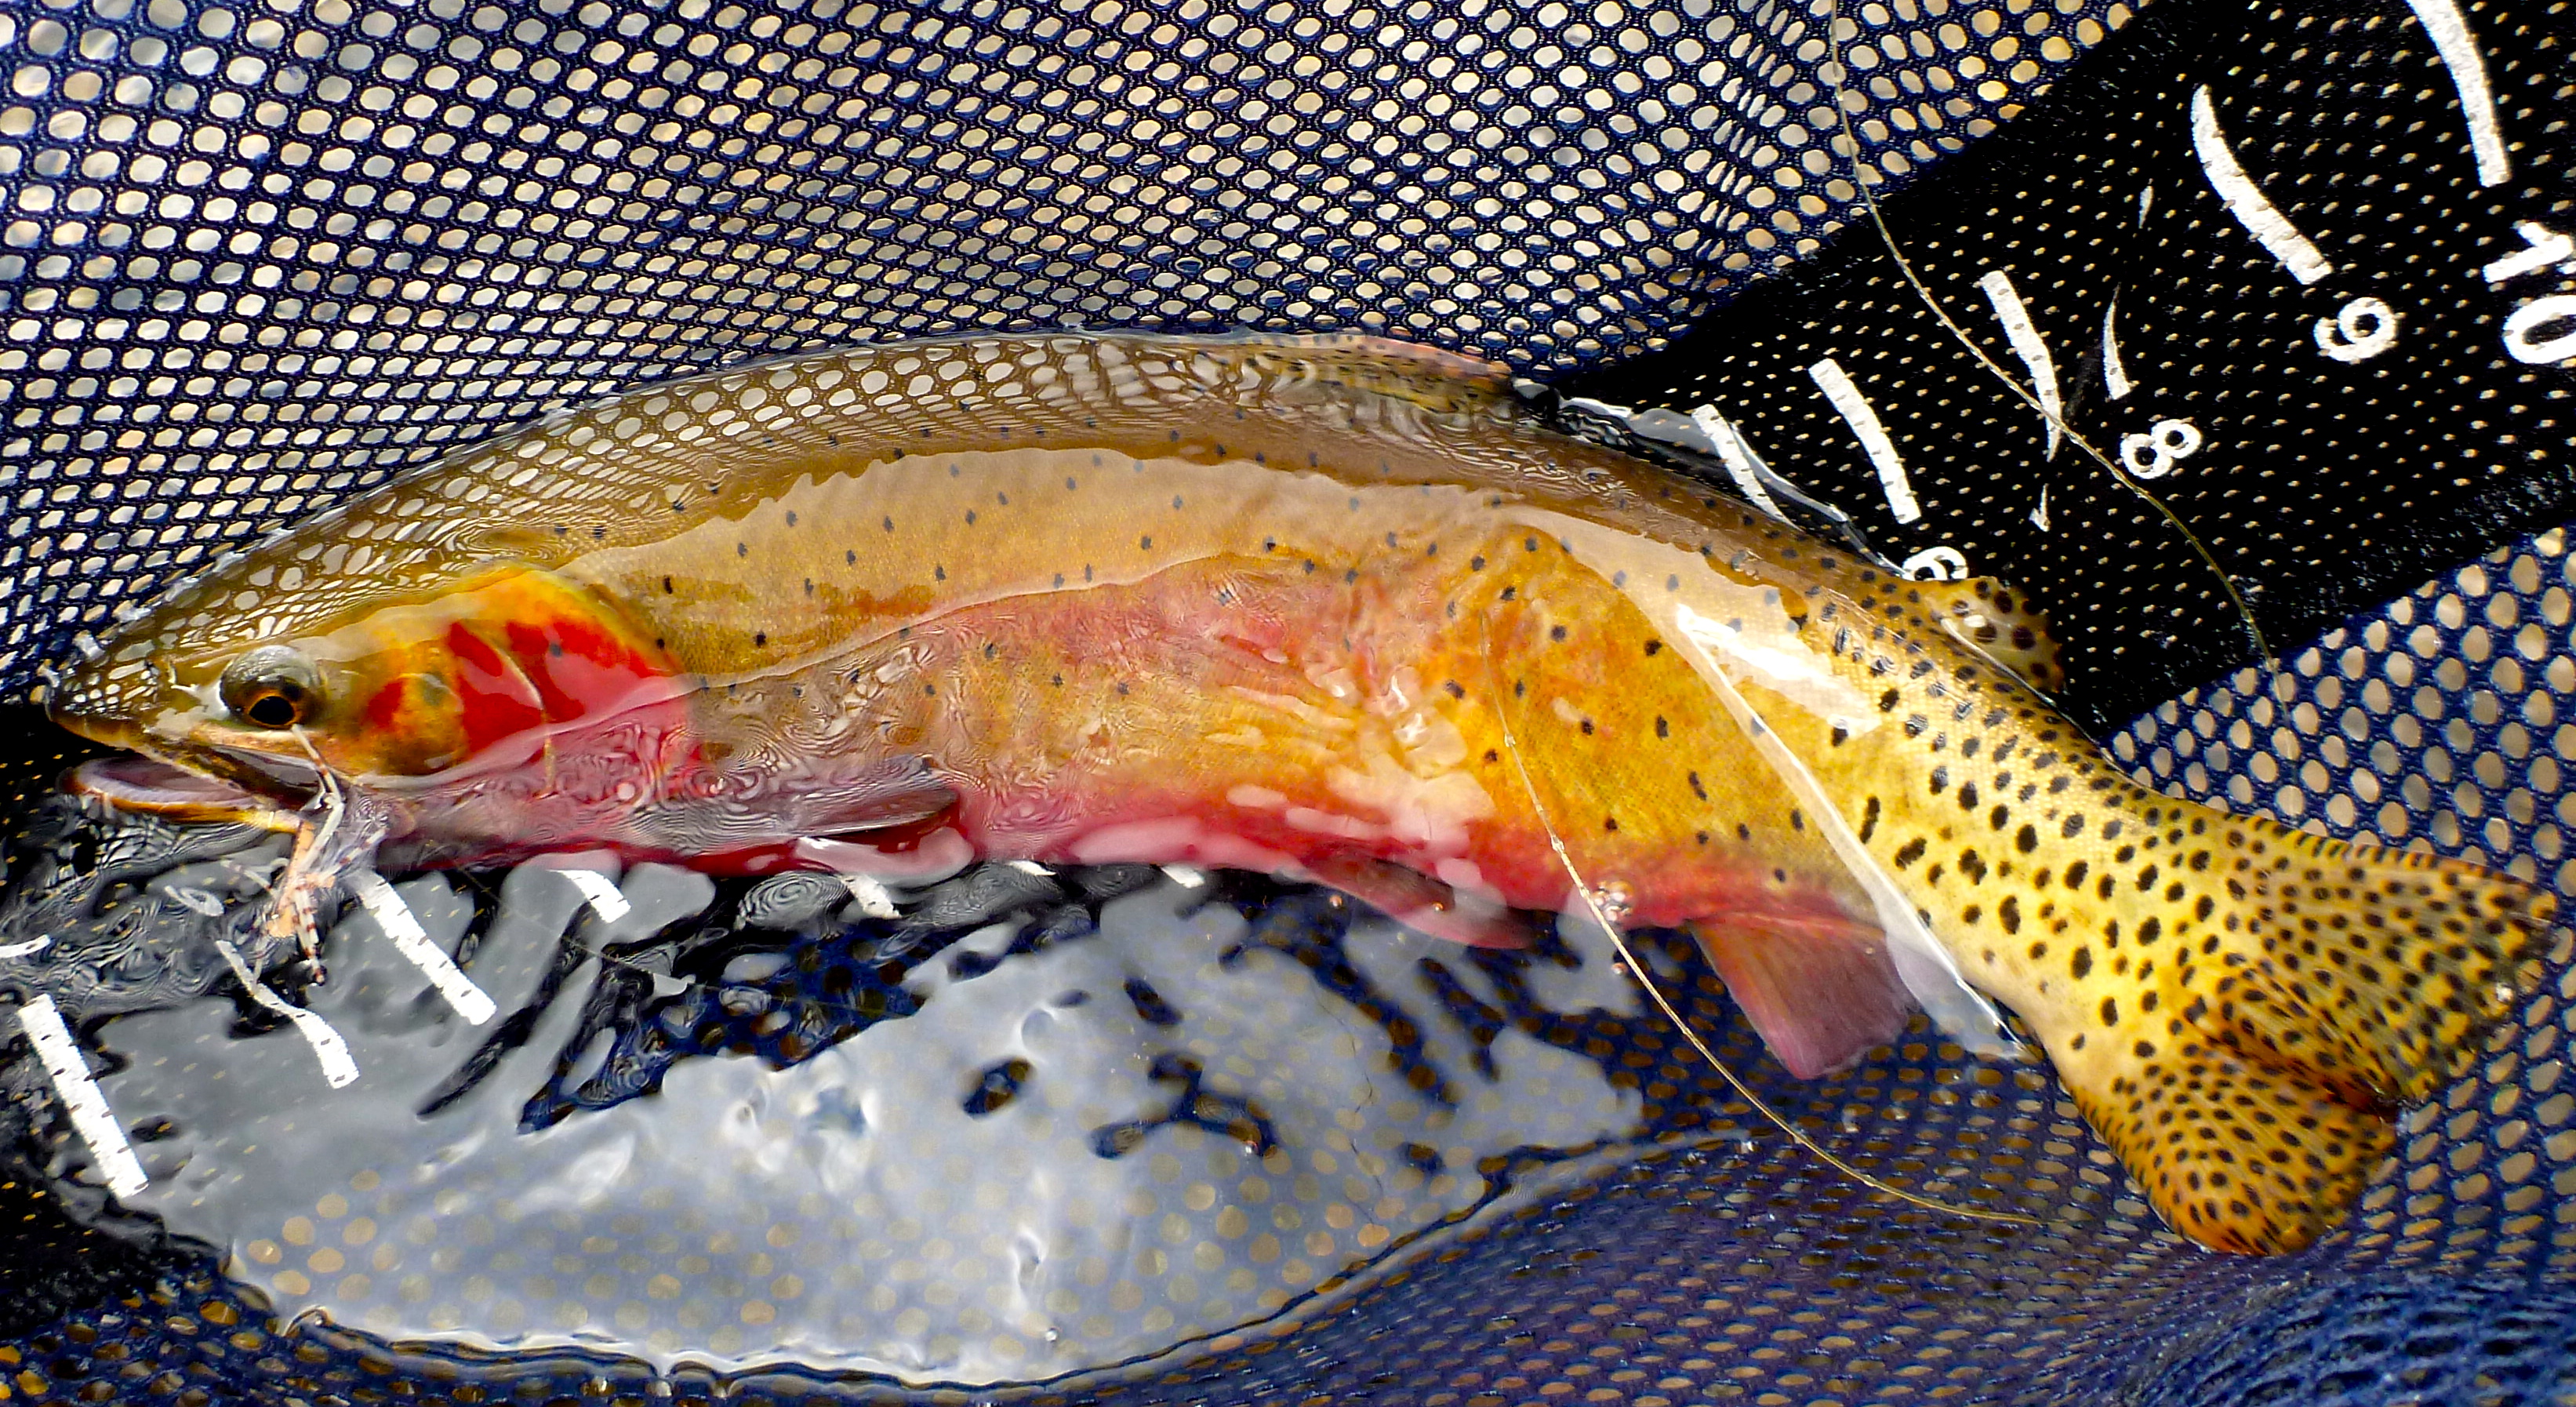 Prettiest fish I have seen while fly fishing